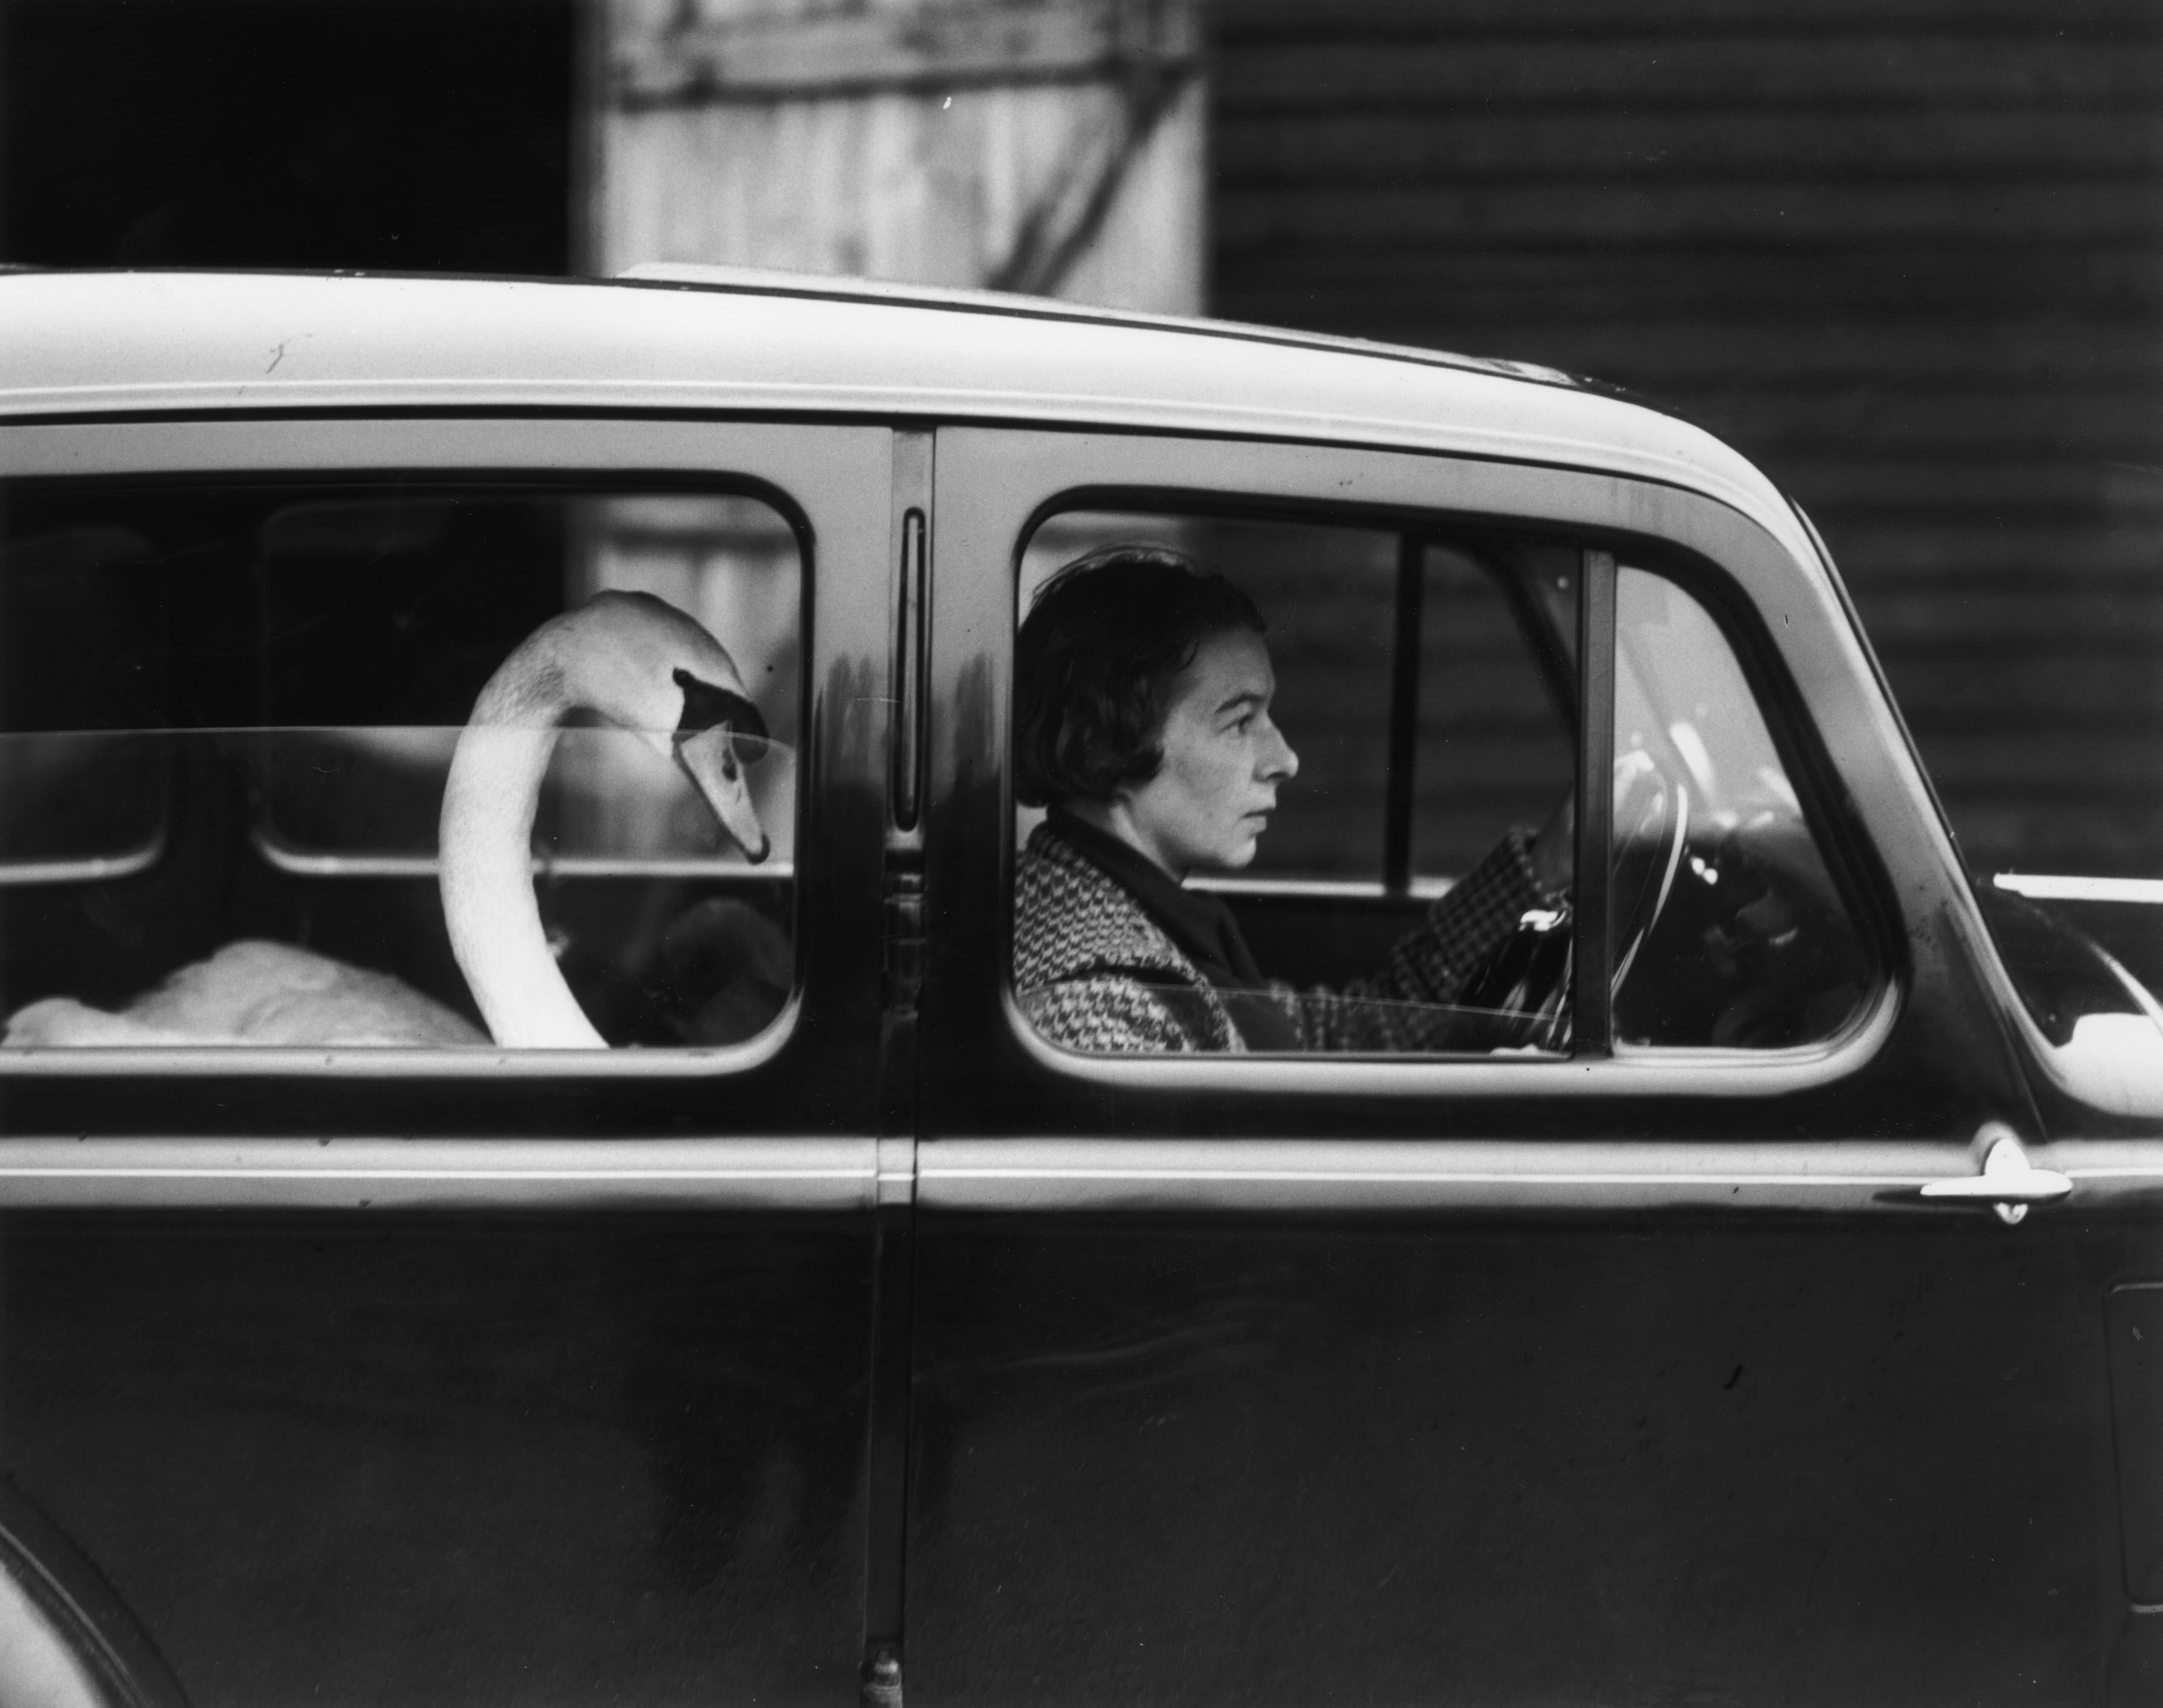 Unknown Black and White Photograph - 'Swan in Car' Limited Edition Photograph by Getty Images Gallery, 20x16